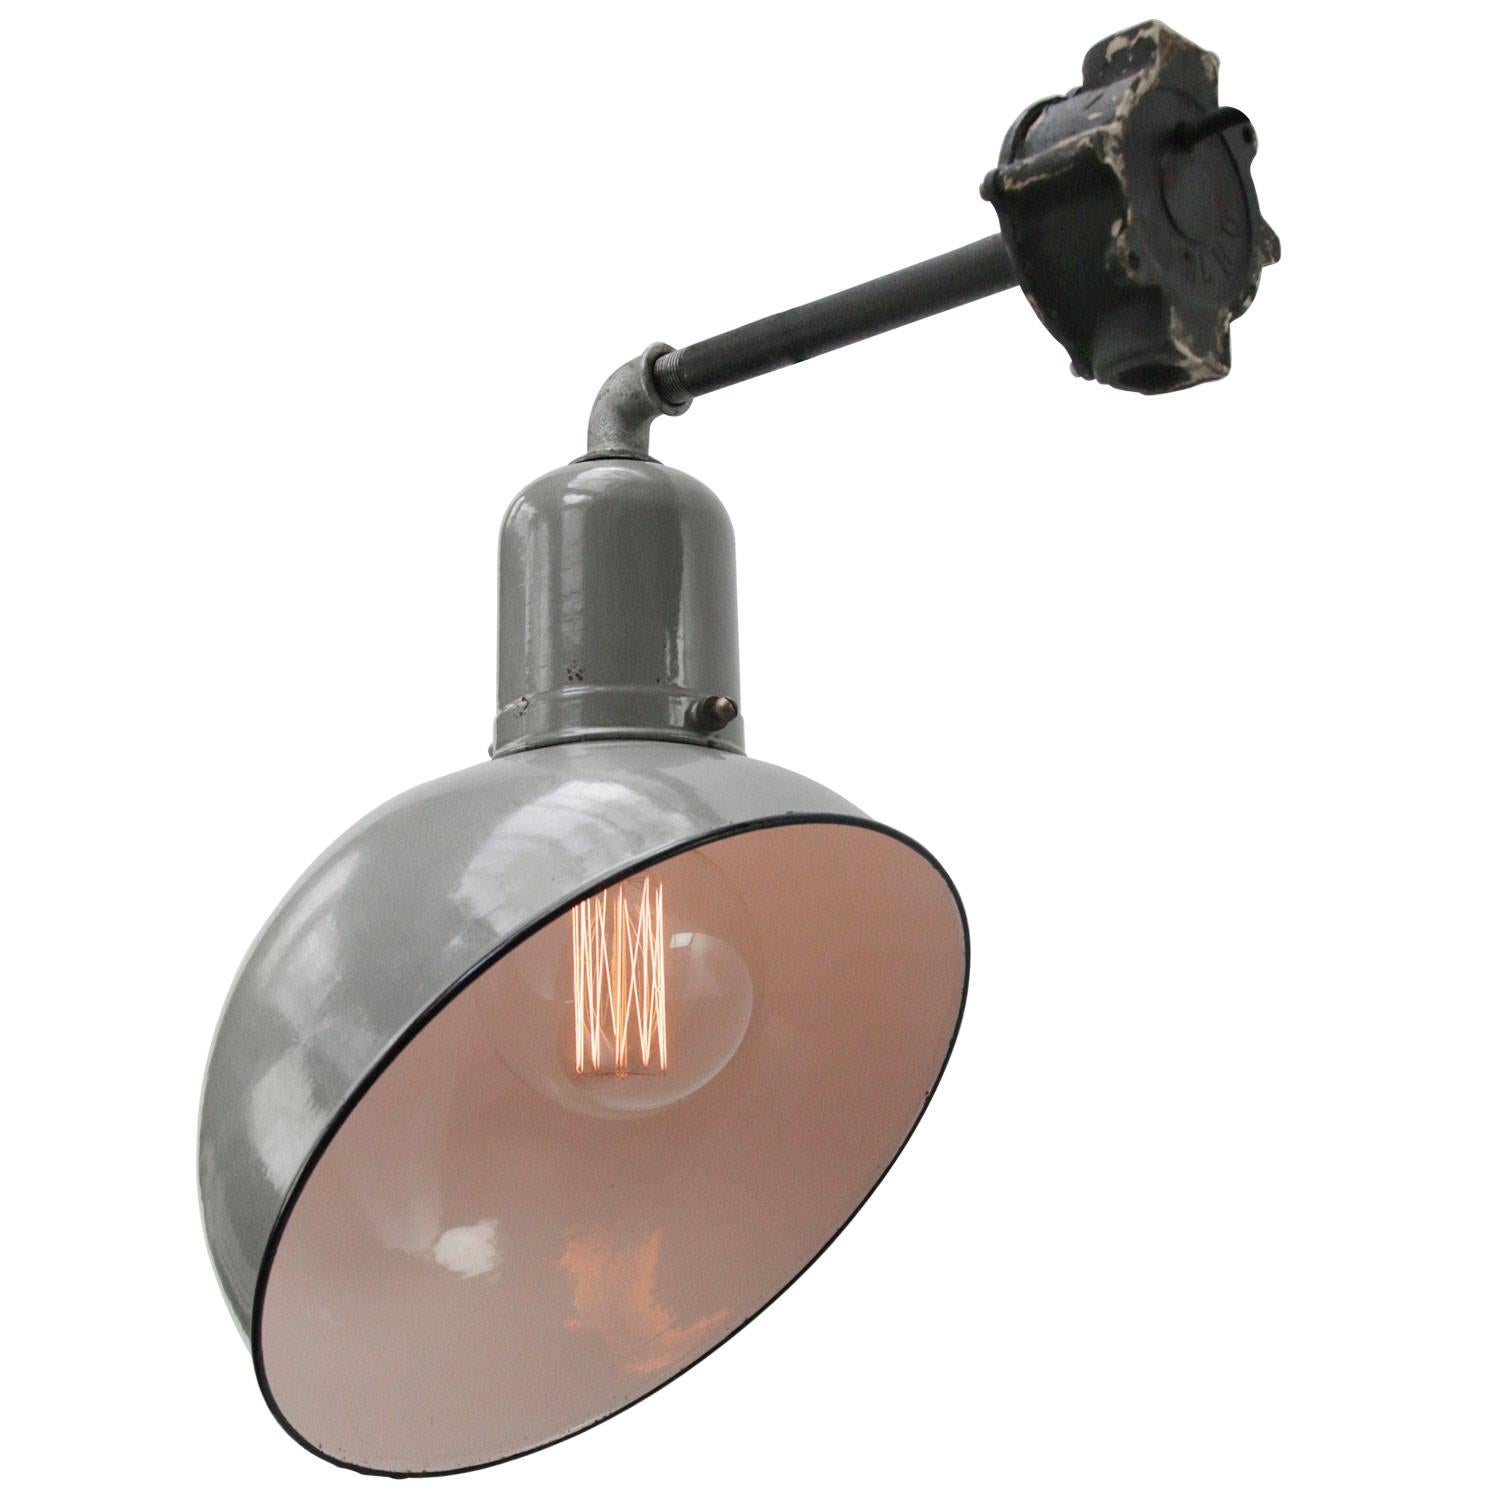 Rare vintage Dutch industrial wall light
grey enamel, cast iron wall base

Weight: 1.80 kg / 4 lb

Priced per individual item. All lamps have been made suitable by international standards for incandescent light bulbs, energy-efficient and LED